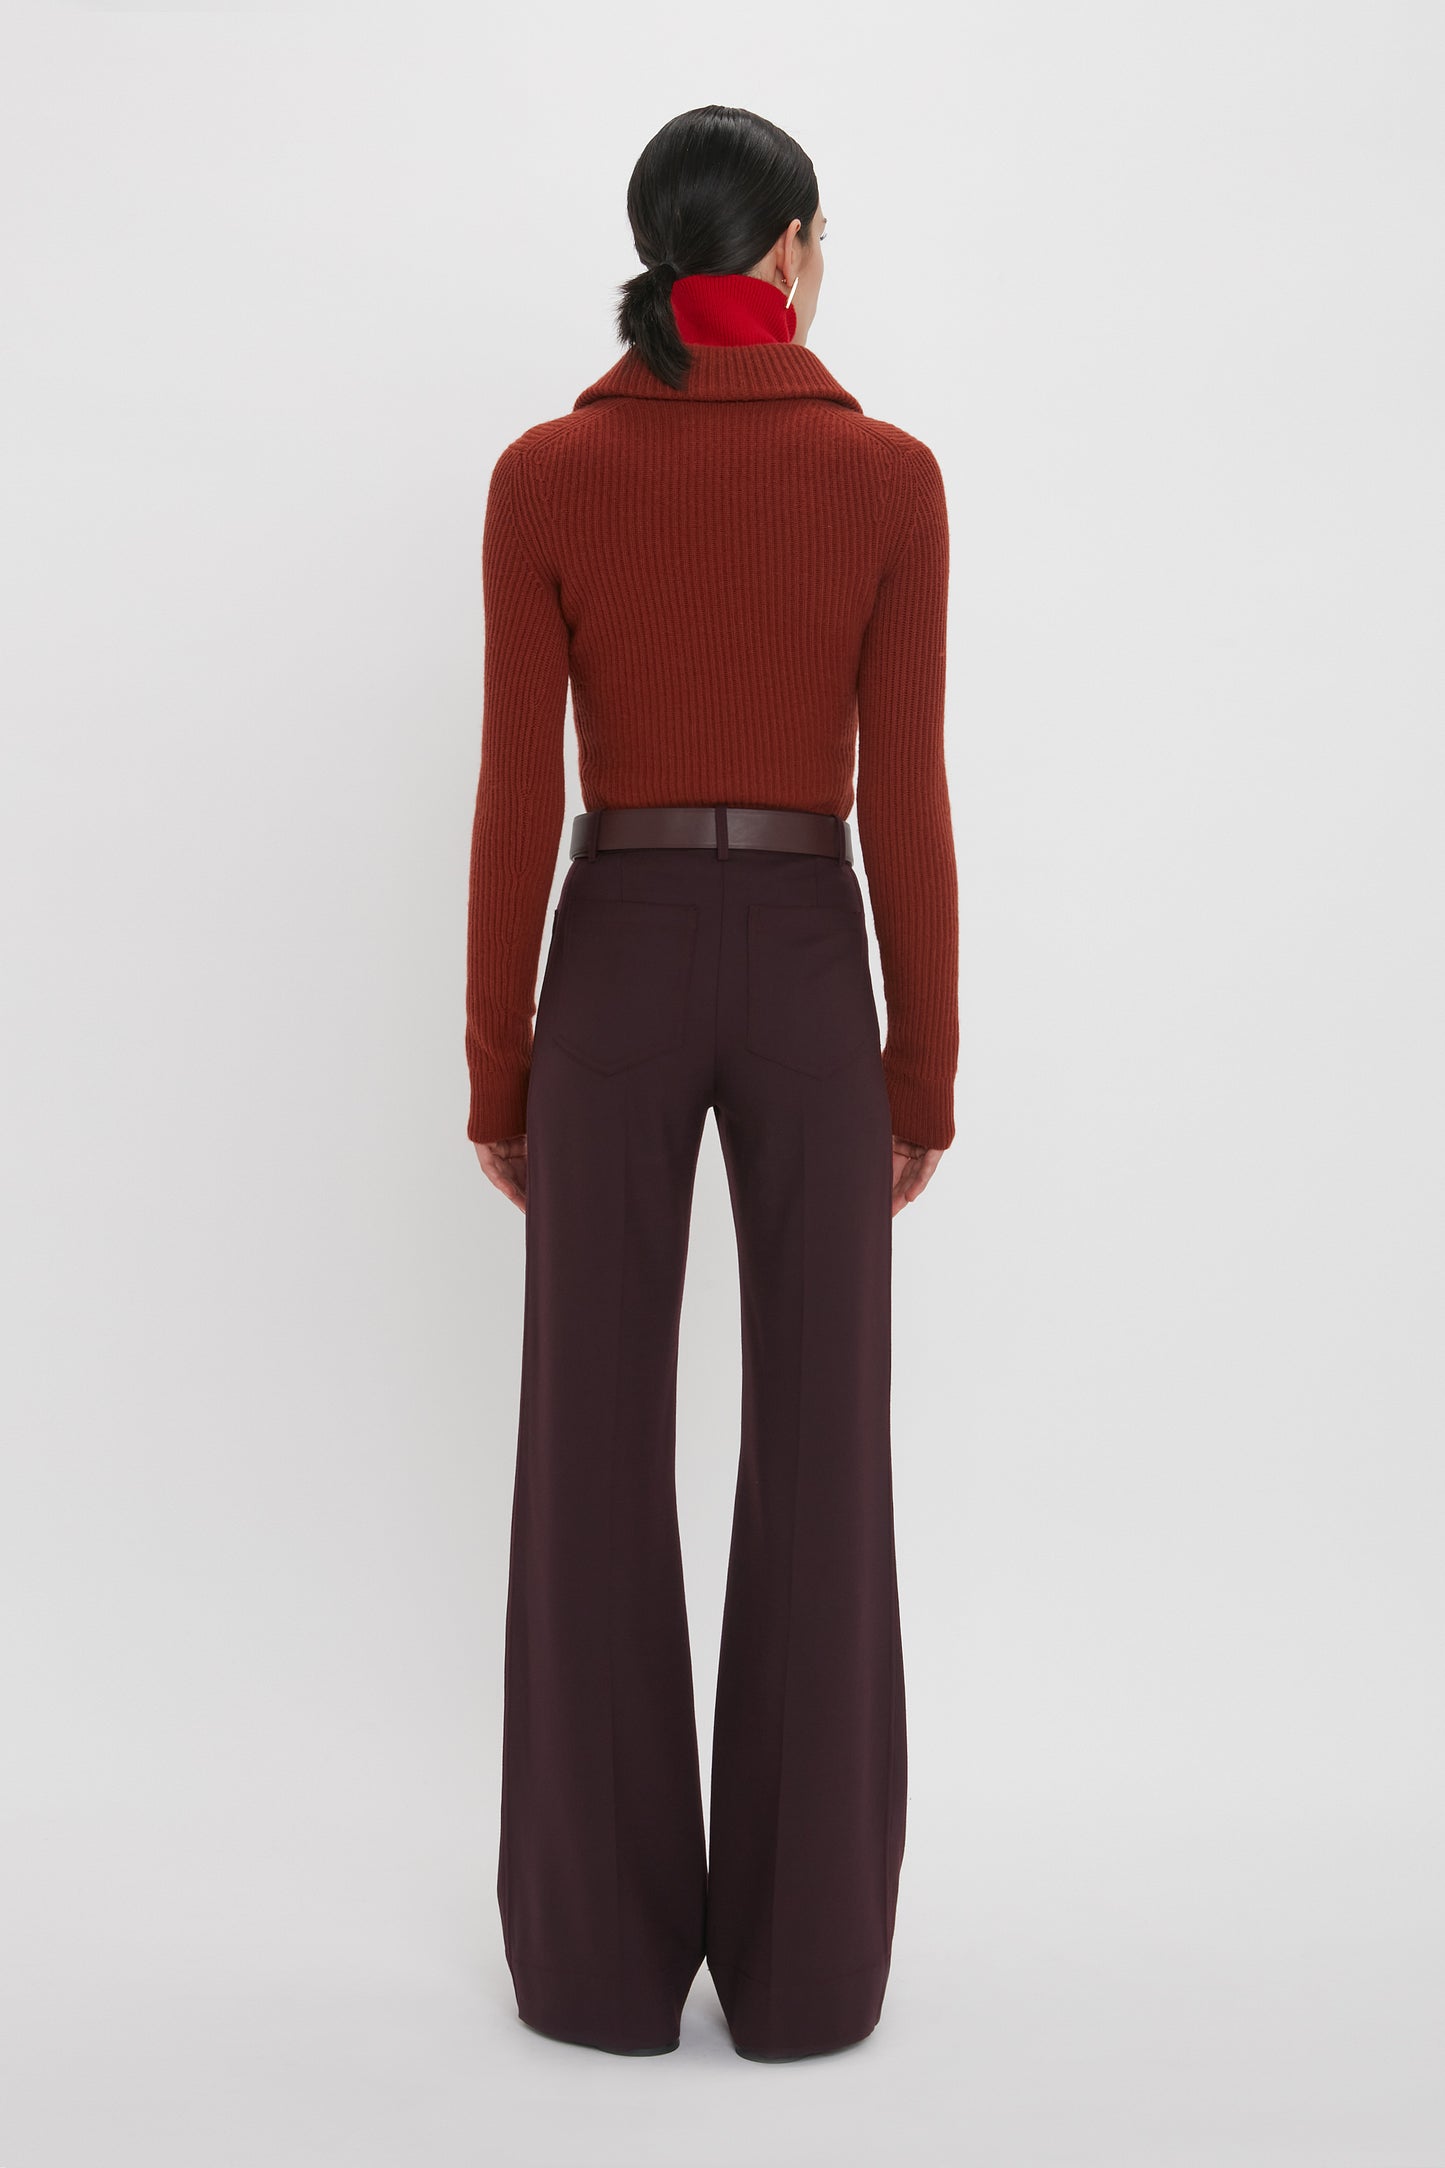 A person stands facing away, wearing a maroon ribbed turtleneck sweater, reminiscent of a Victoria Beckham Double Collared Jumper In Russet, dark high-waisted wide-leg pants, and a red scarf, against a plain white background.